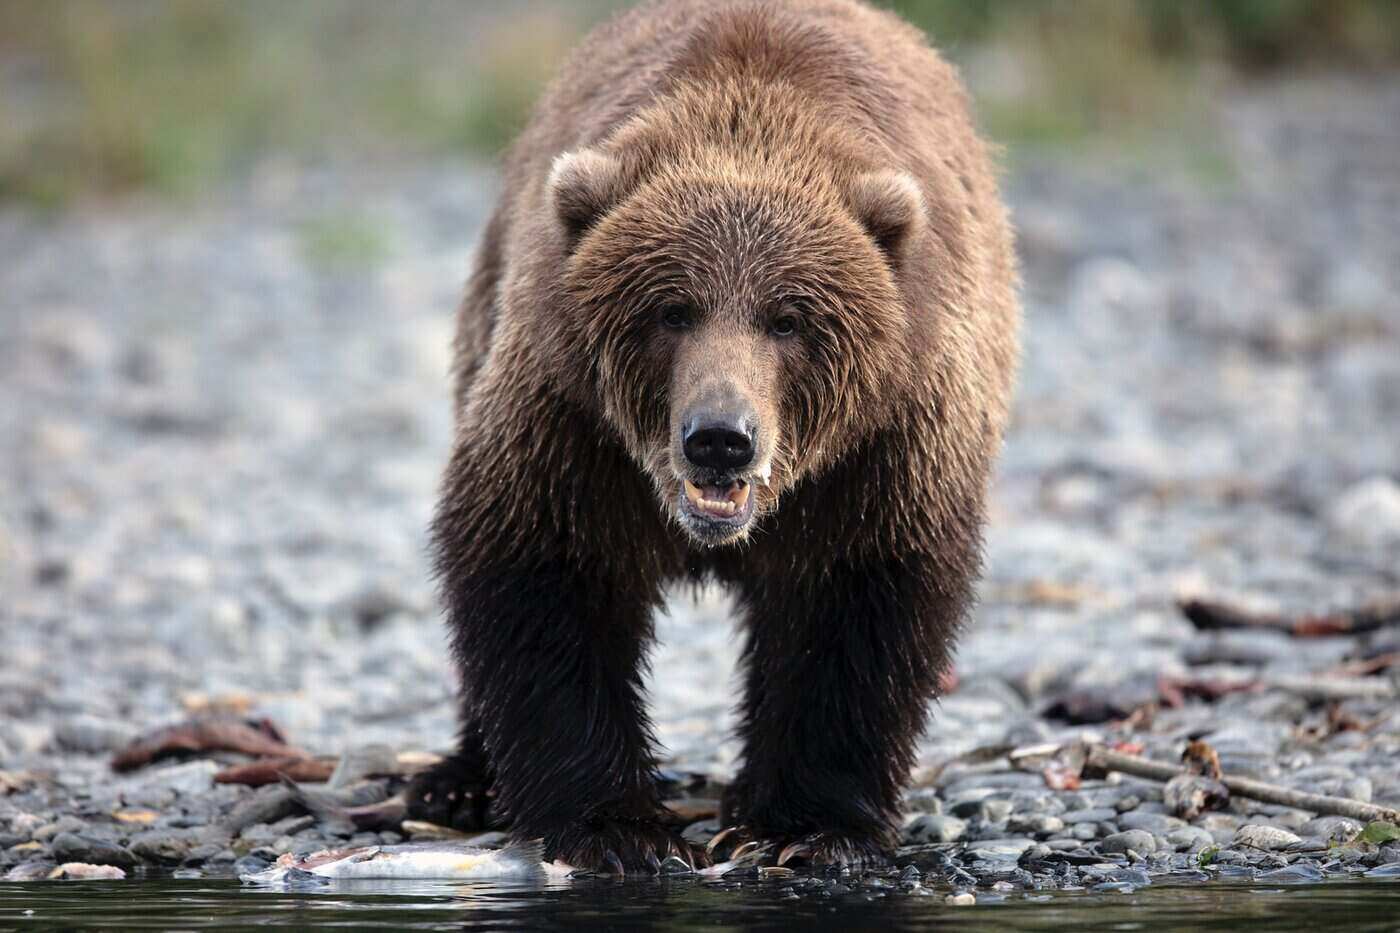 kodiak bear by water - all about the worlds largest bear species